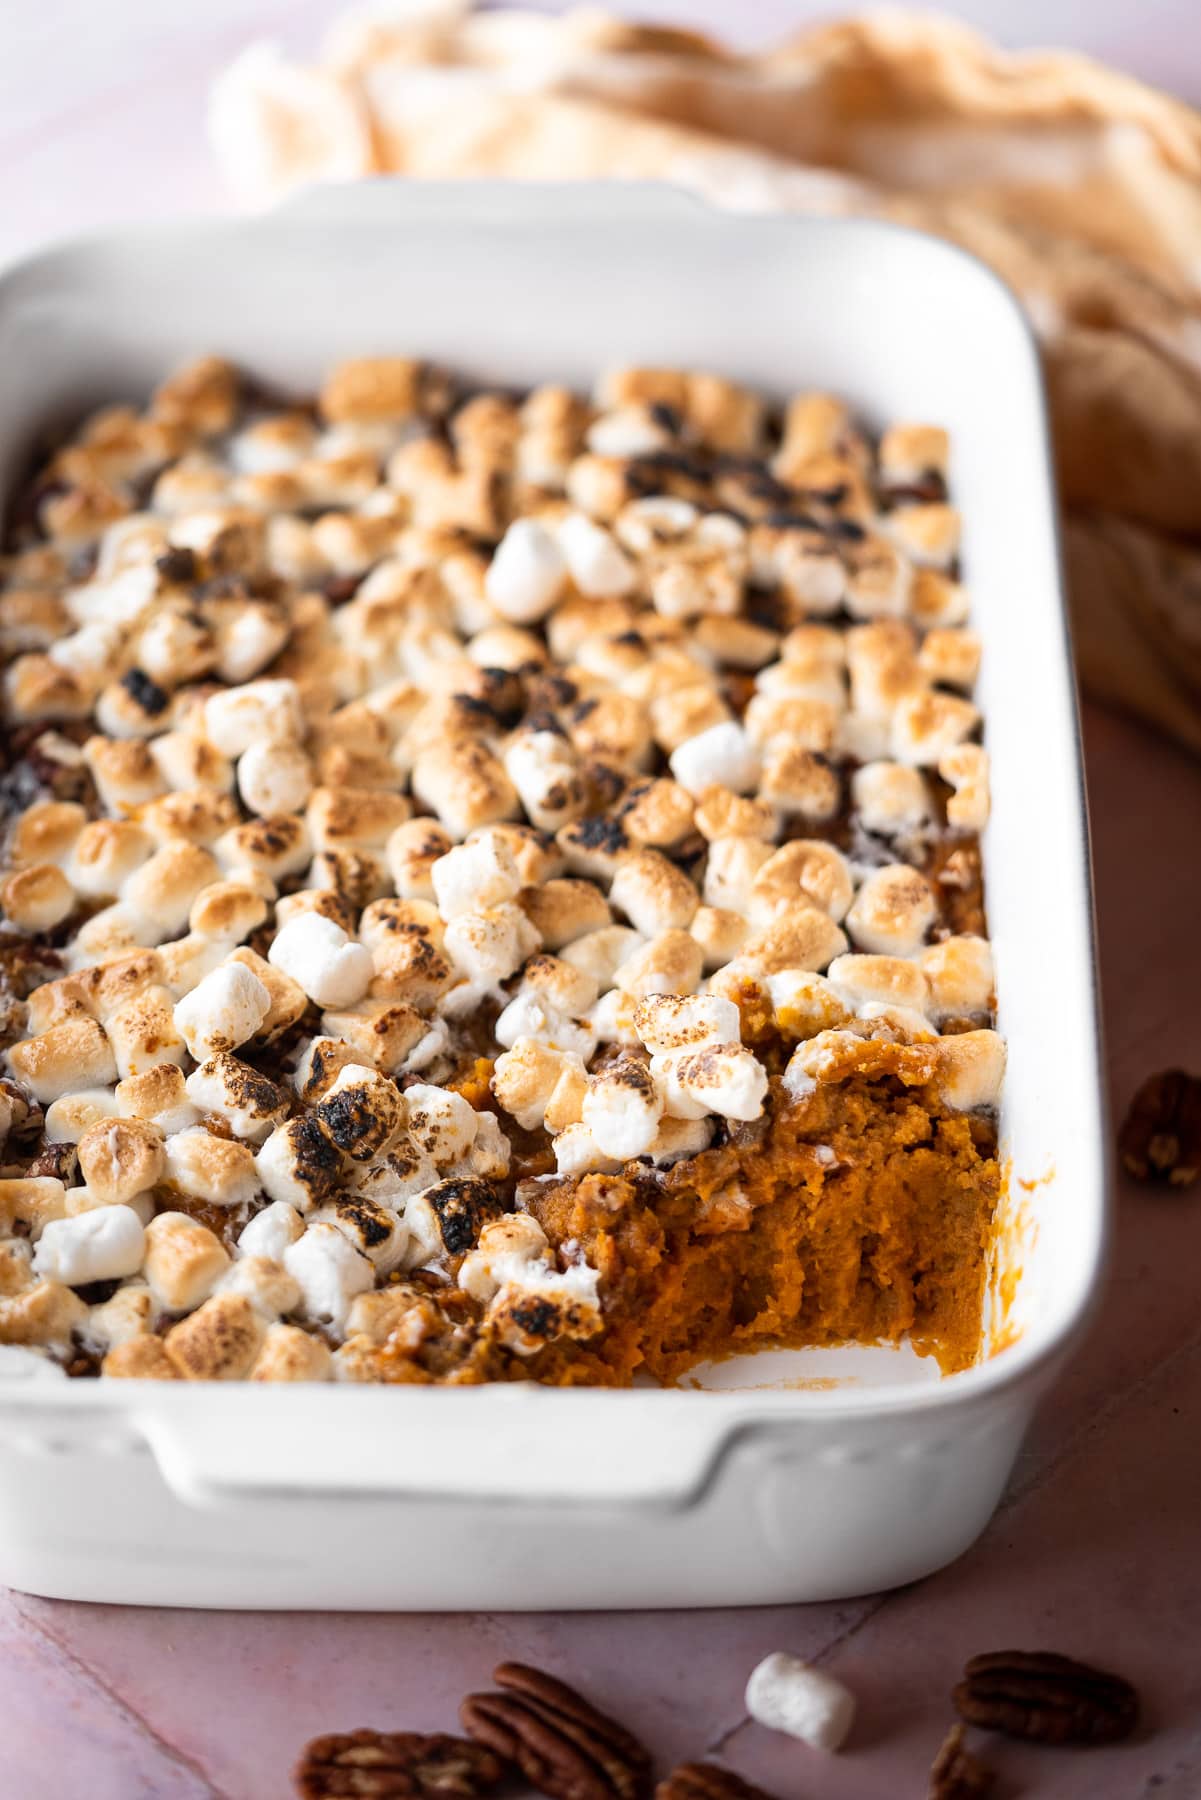 sweet potato casserole in a white baker with toasted marshmallow